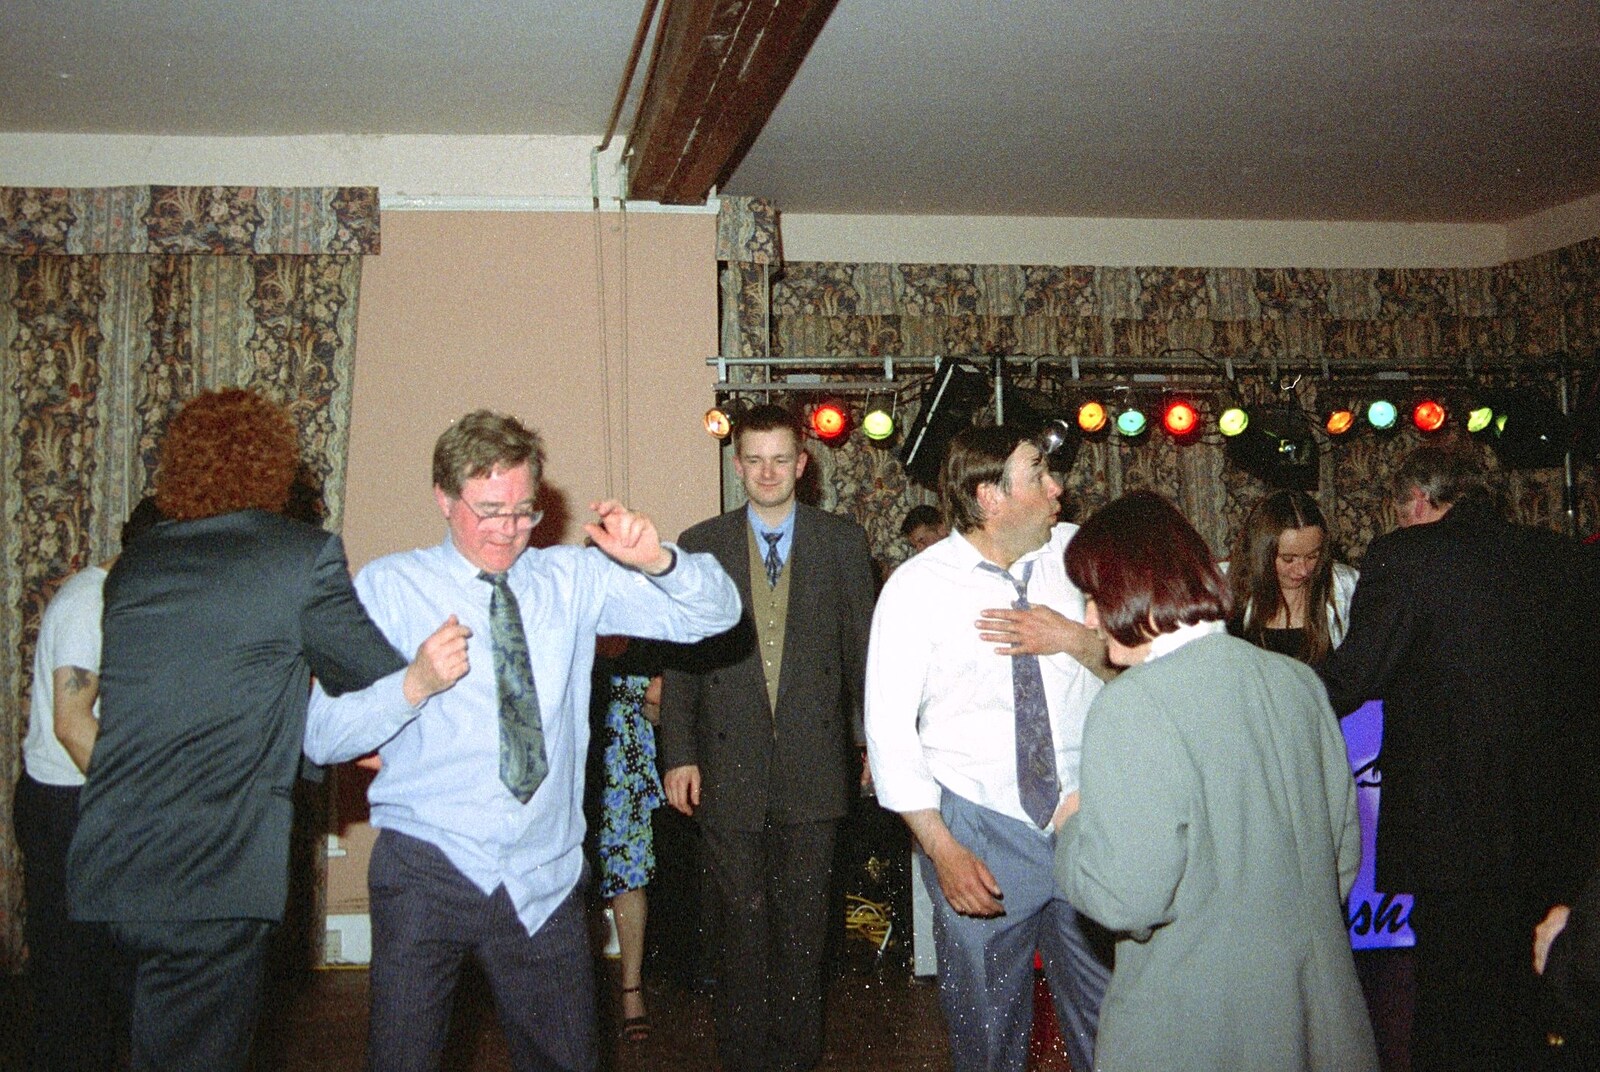 Nosher at the back of the room from The Brome Swan at Graham and Pauline's Wedding, Gissing Hall, Norfolk - 28th April 1997